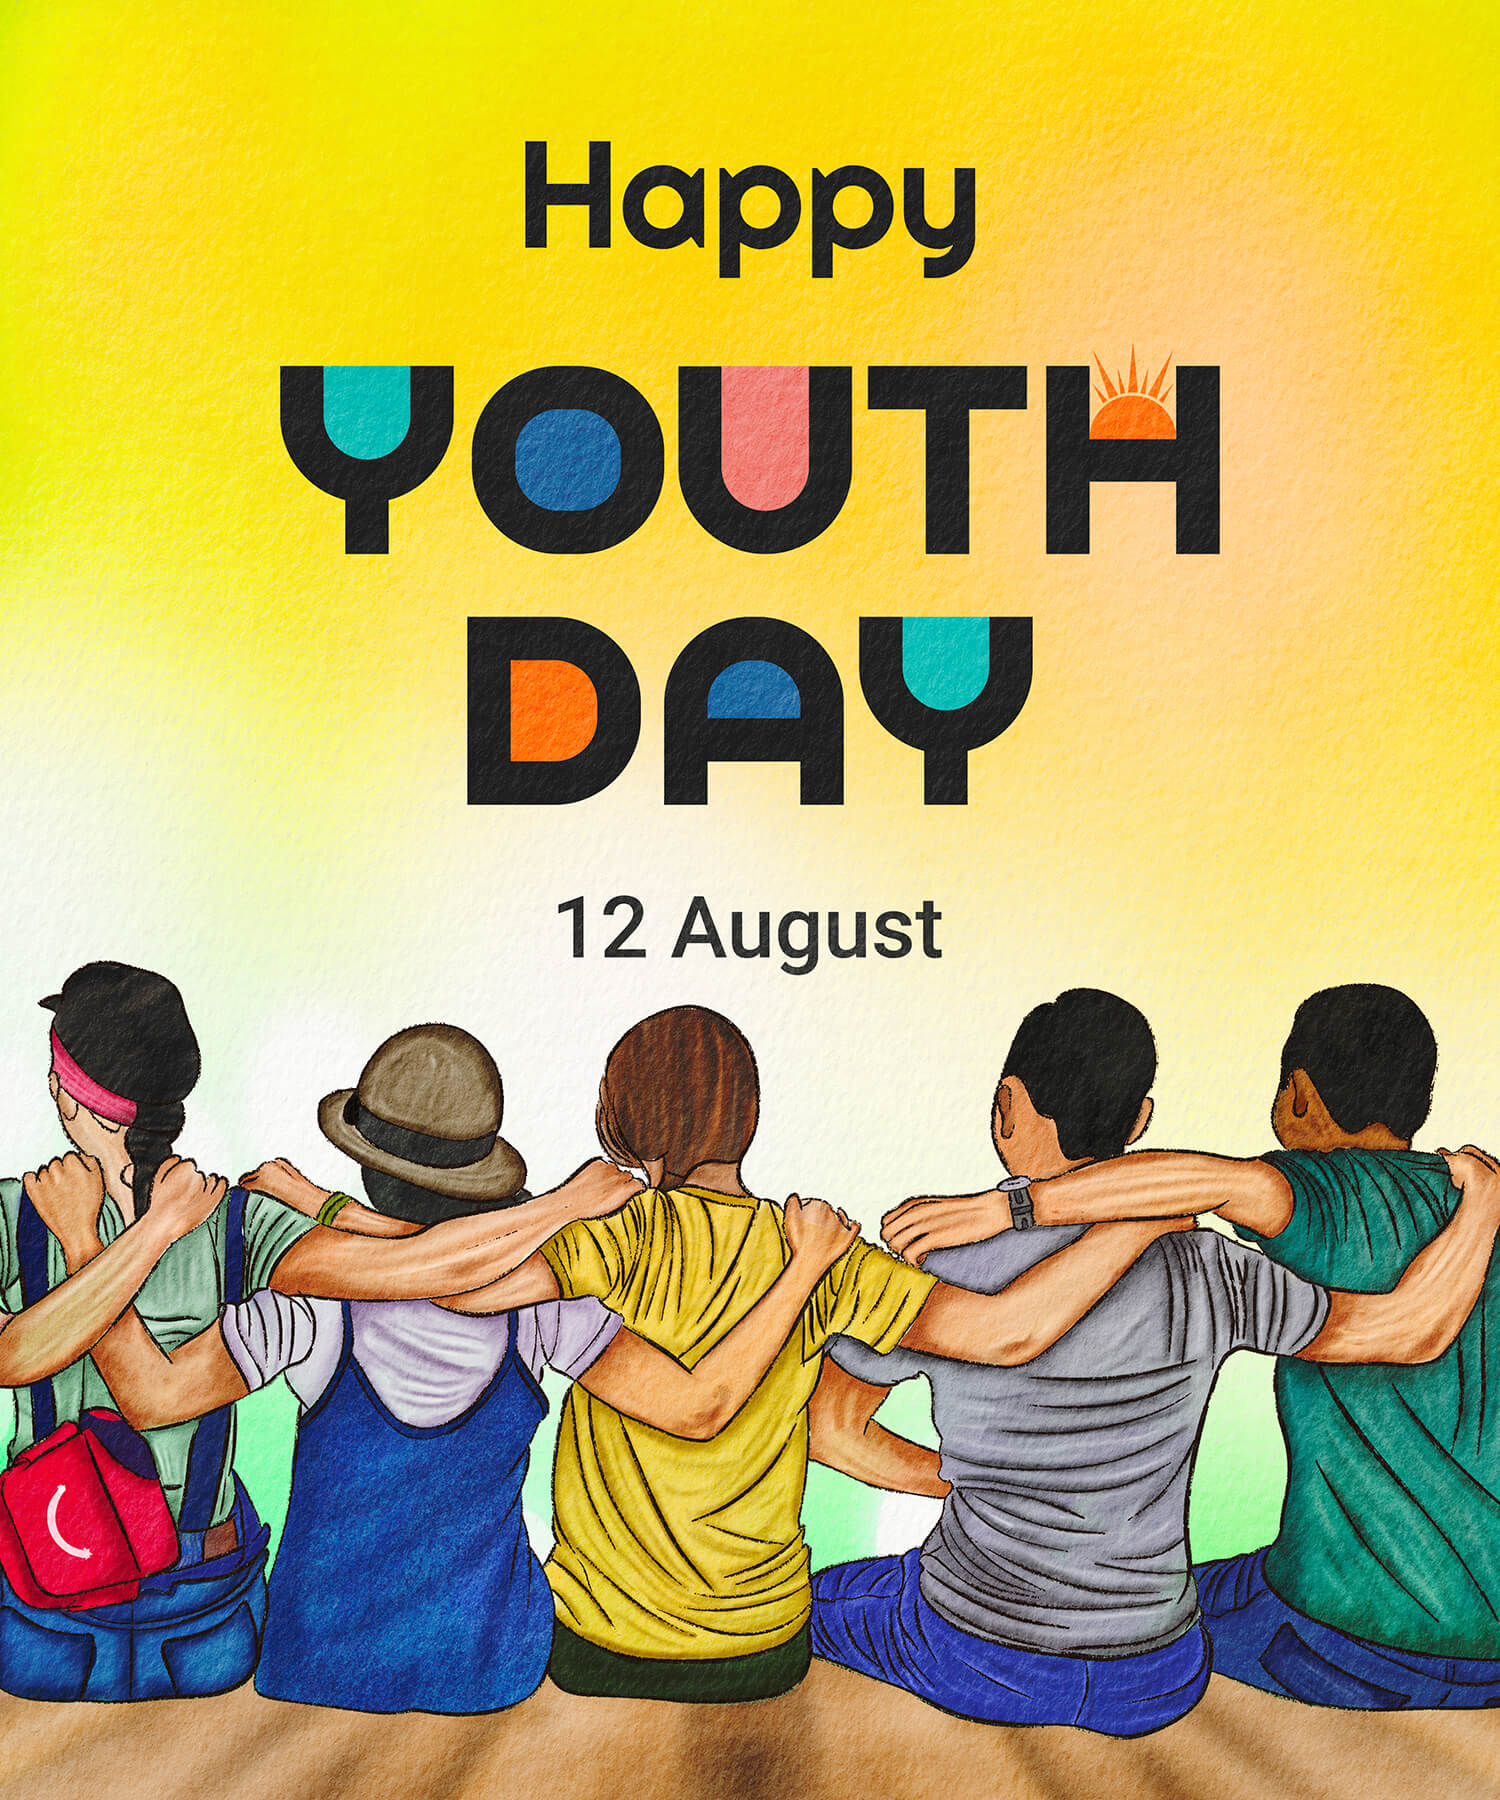 Hand Drawn Watercolor Illustration of International Youth Day 12th August